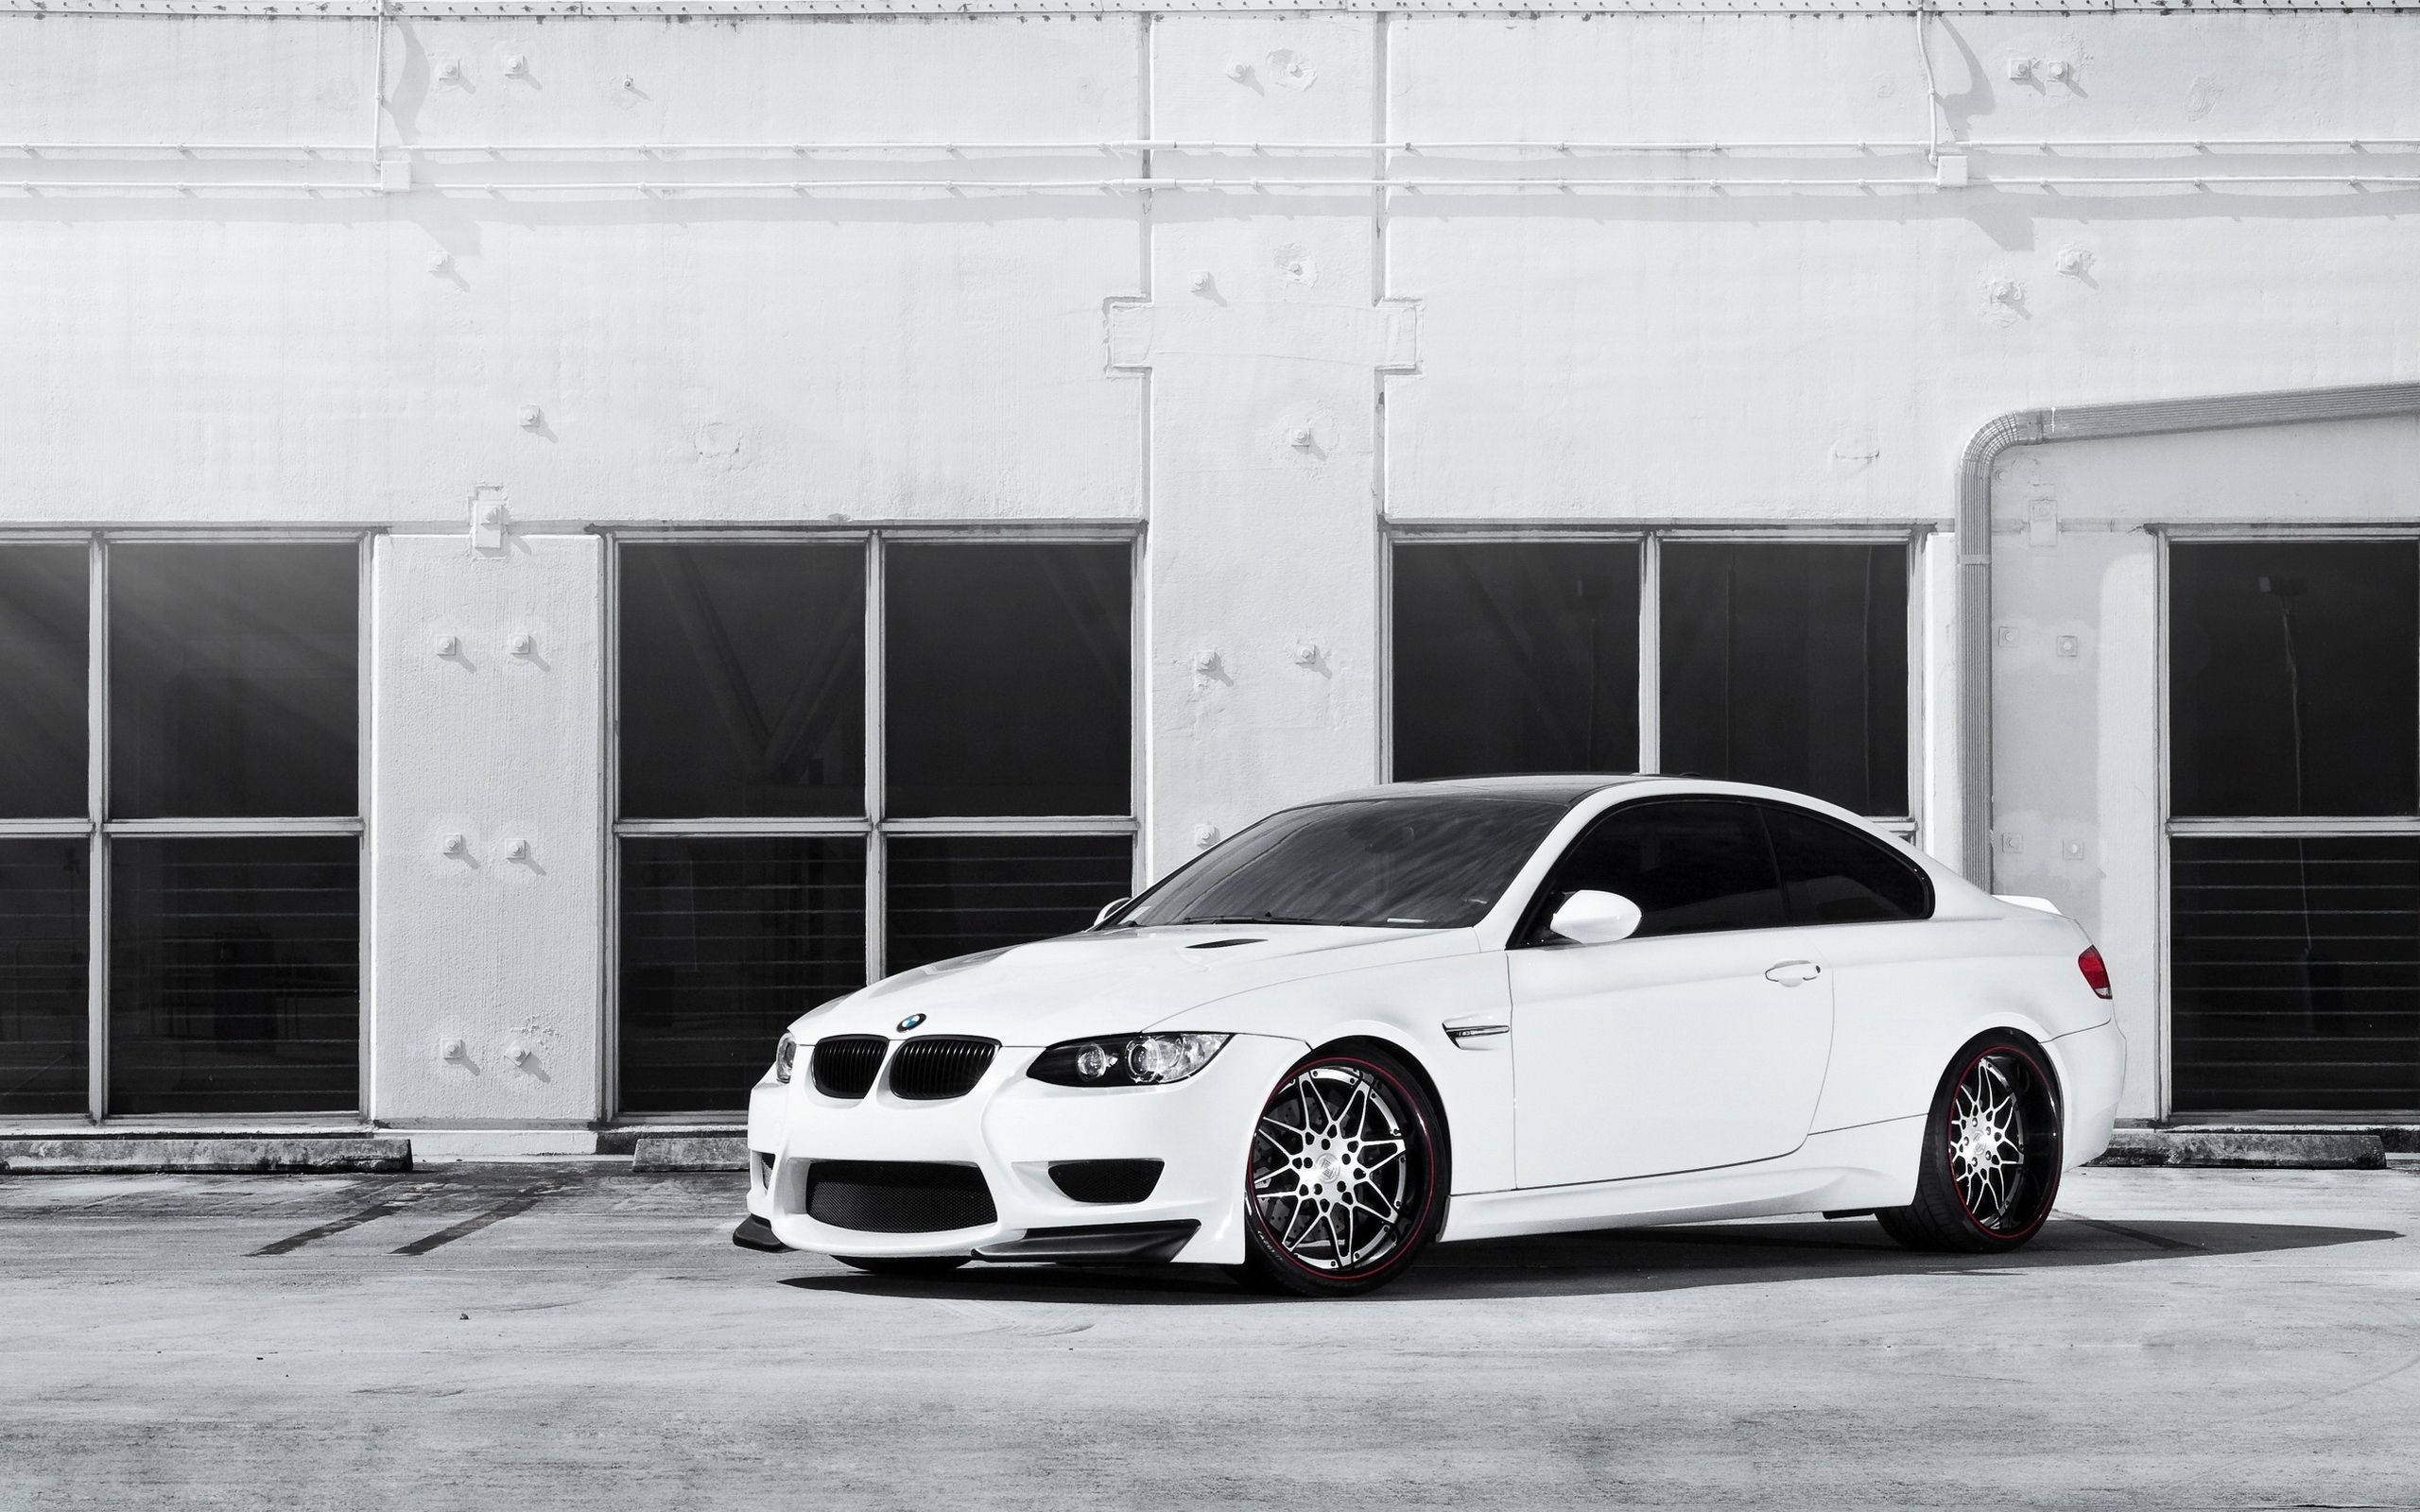 BMW M3 wallpapers and images - wallpapers, pictures, photos